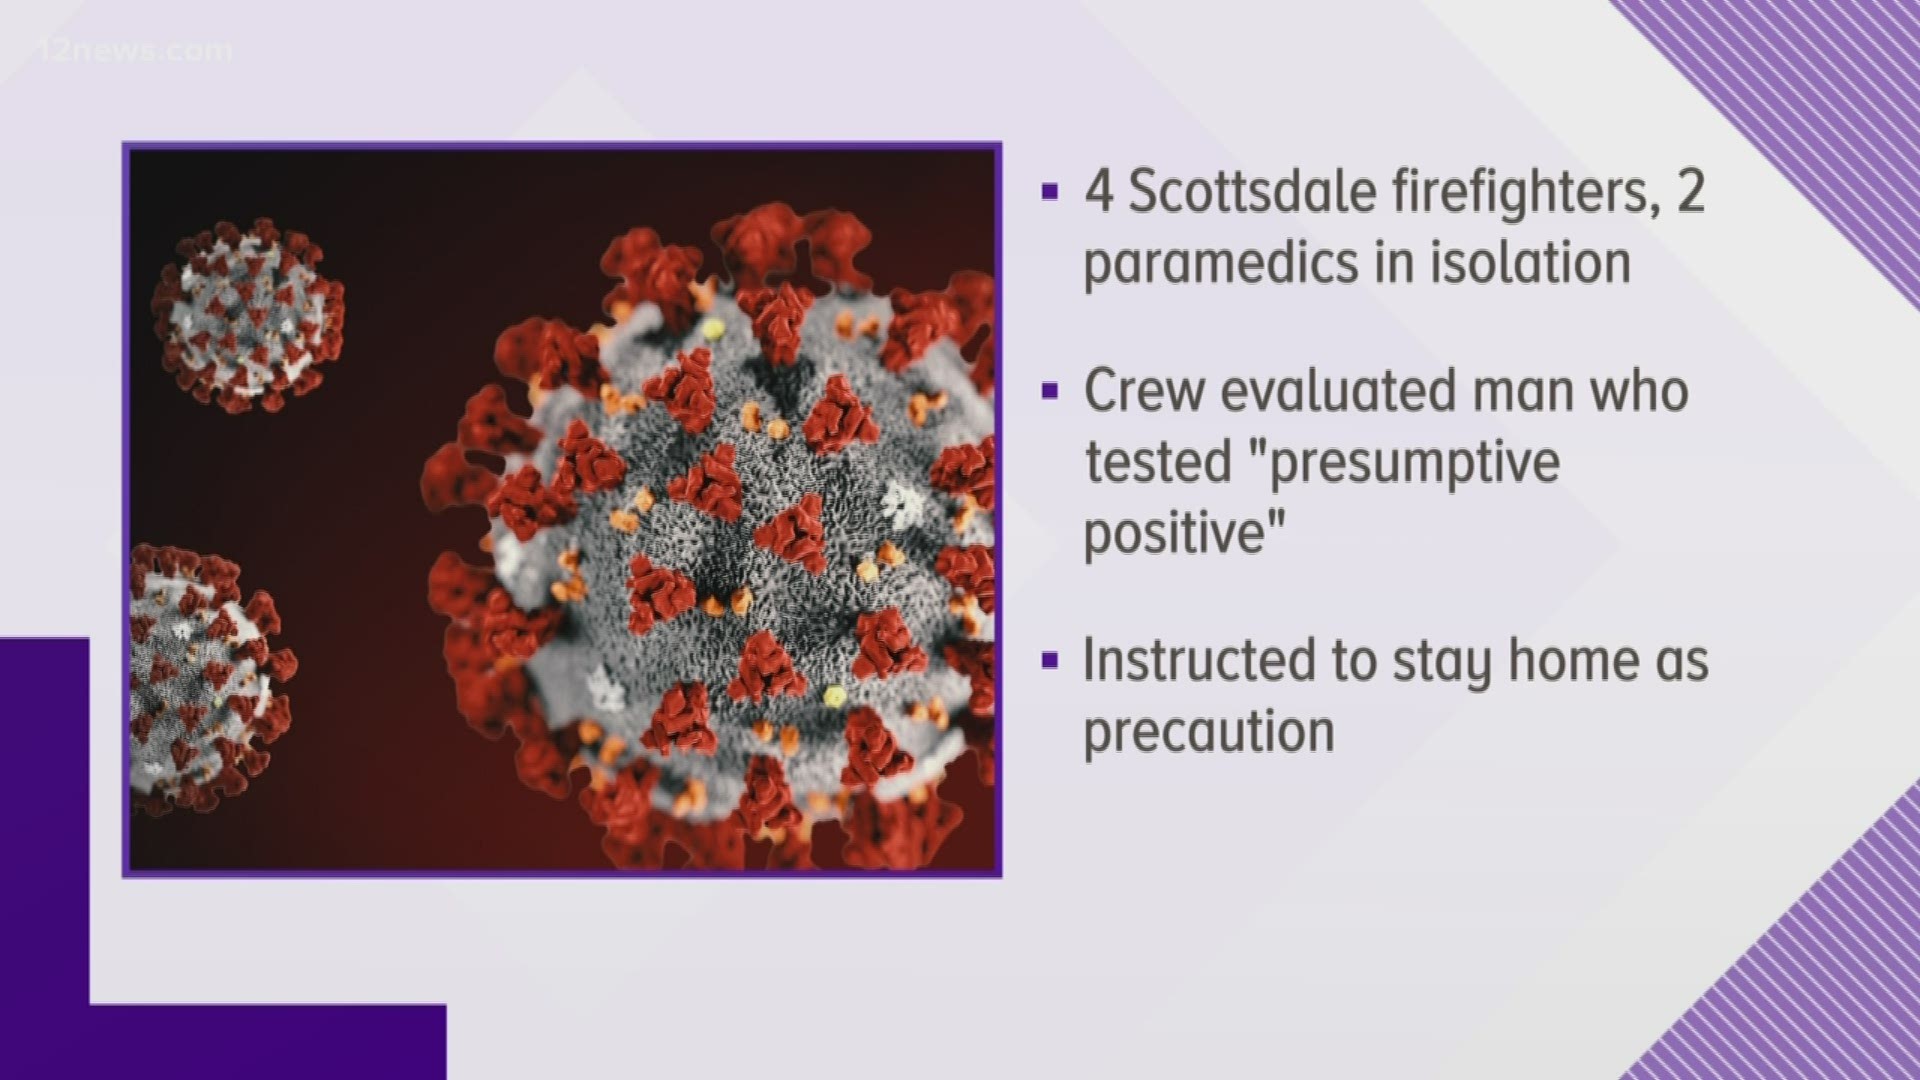 Four firefighters and two paramedics are in isolation after helping a patient who tested "presumptive positive" for coronavirus. They are staying home for two weeks.